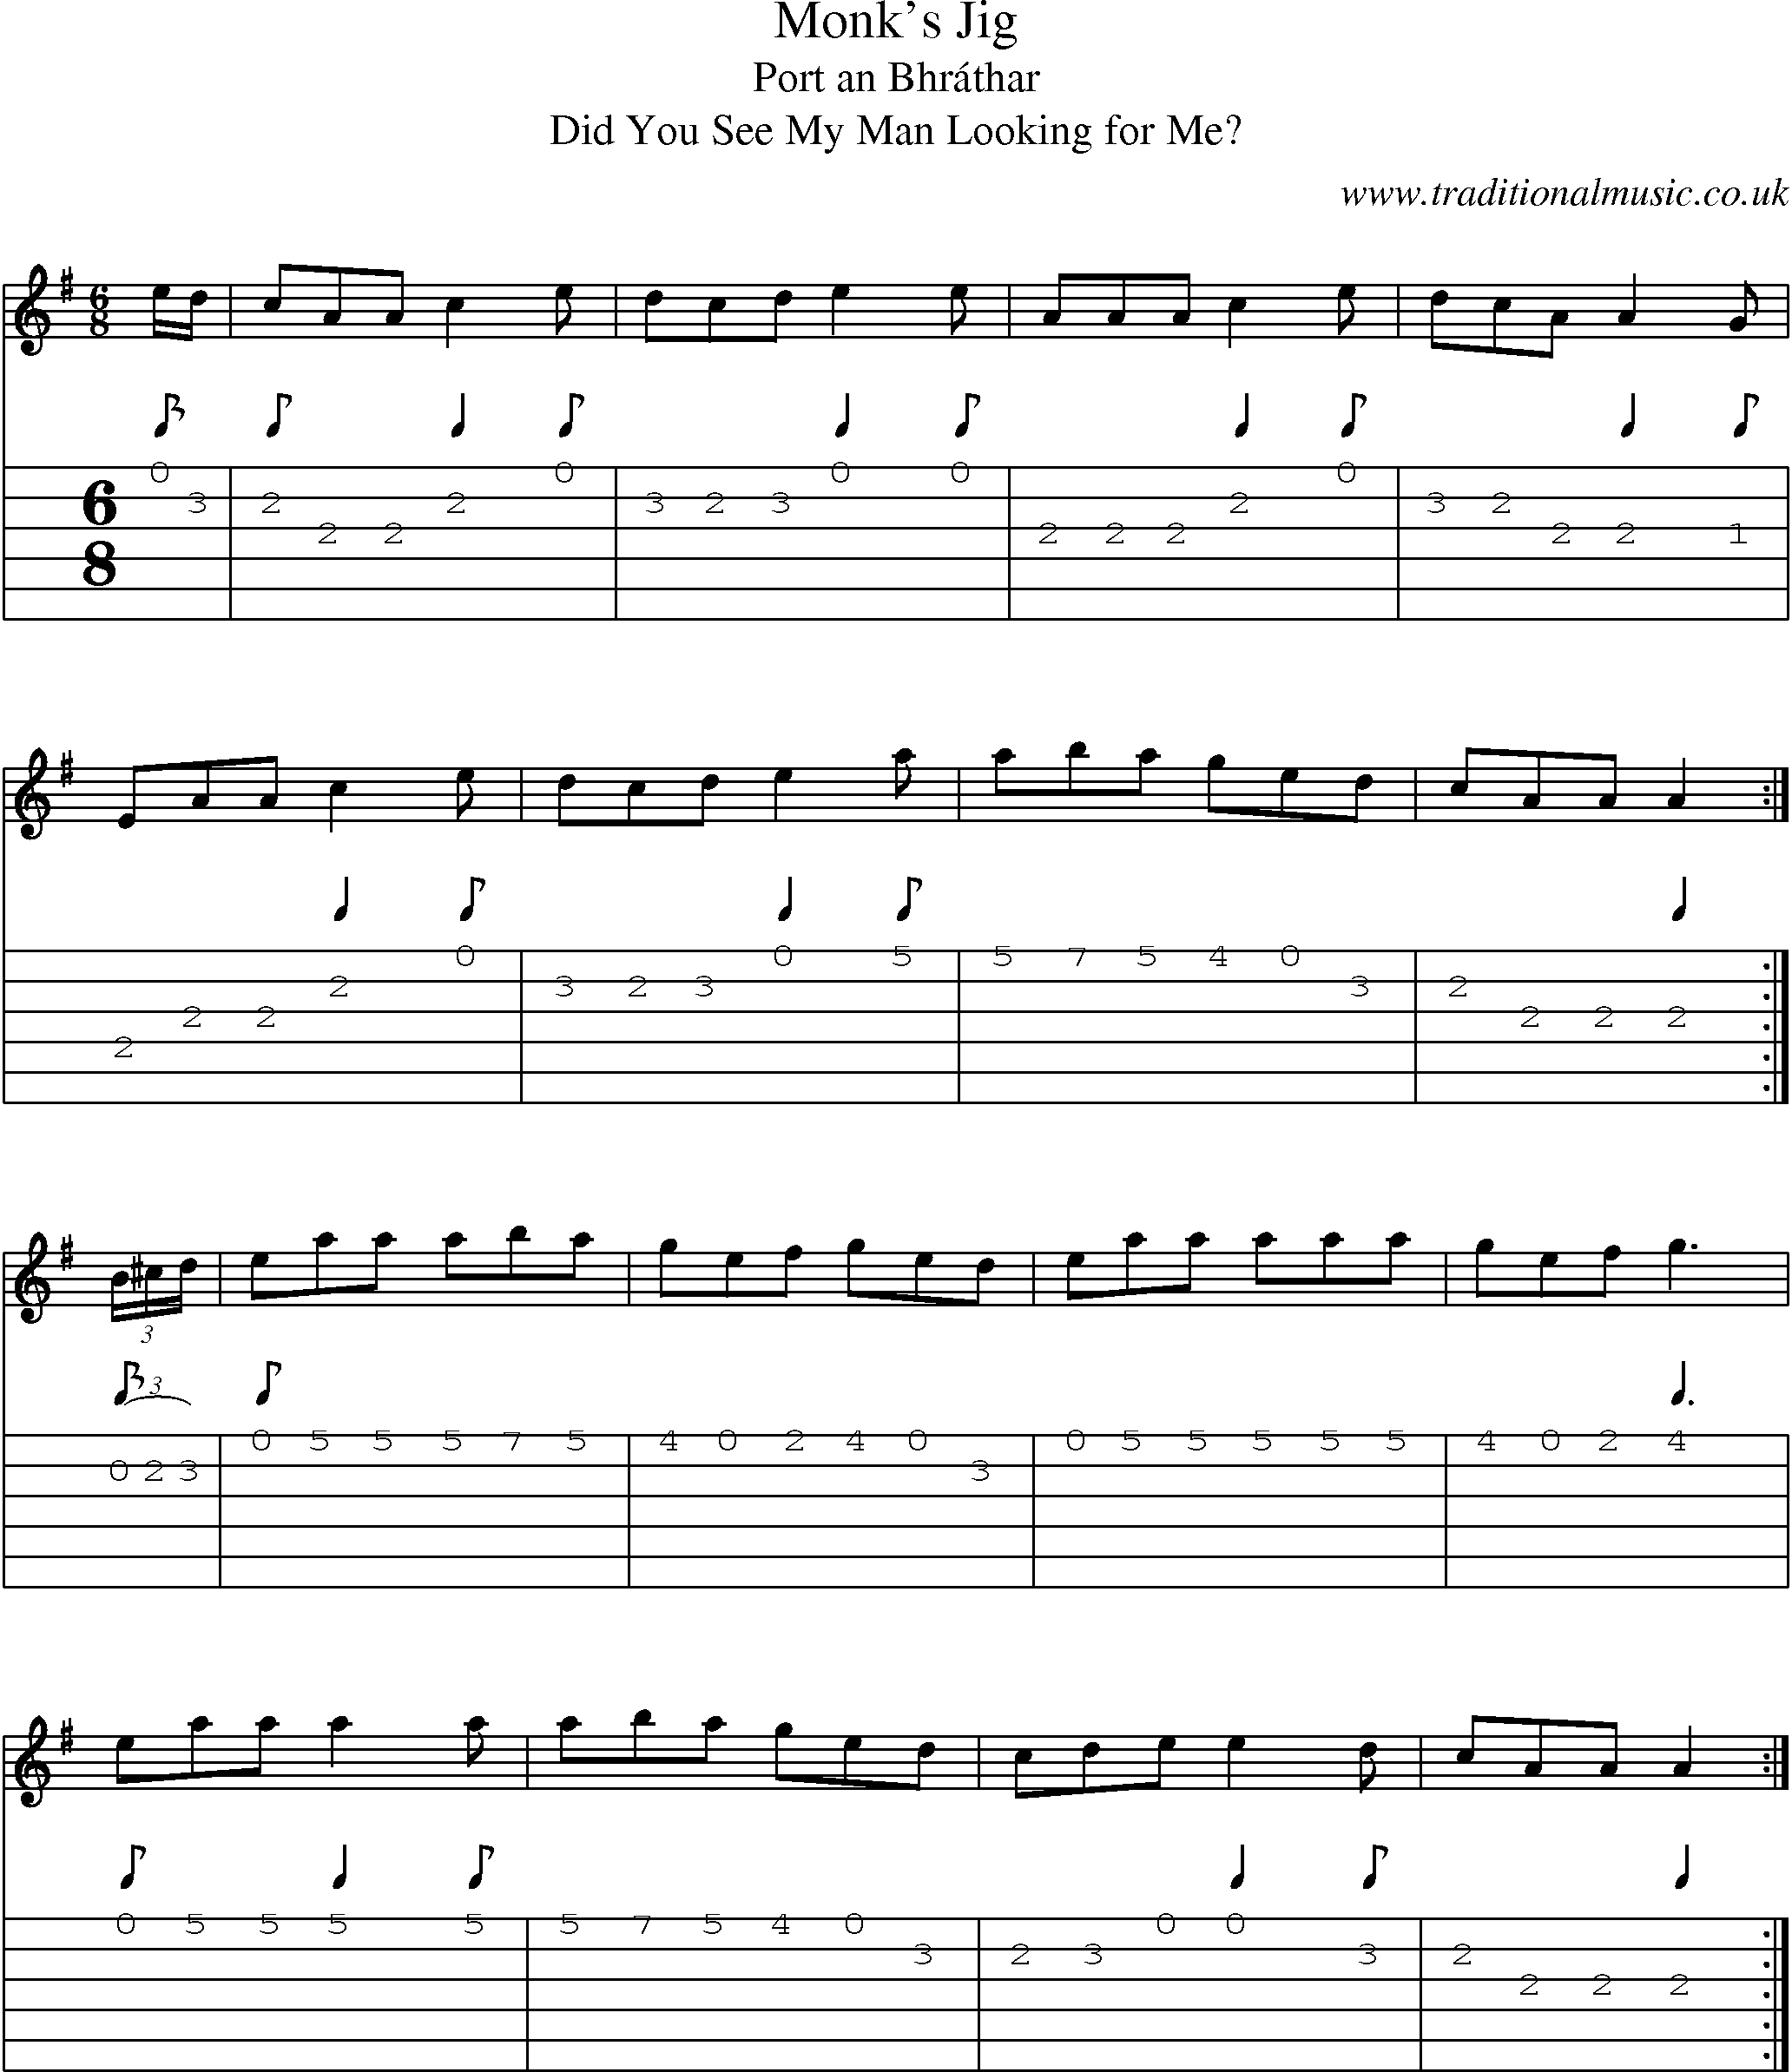 Music Score and Guitar Tabs for Monks Jig